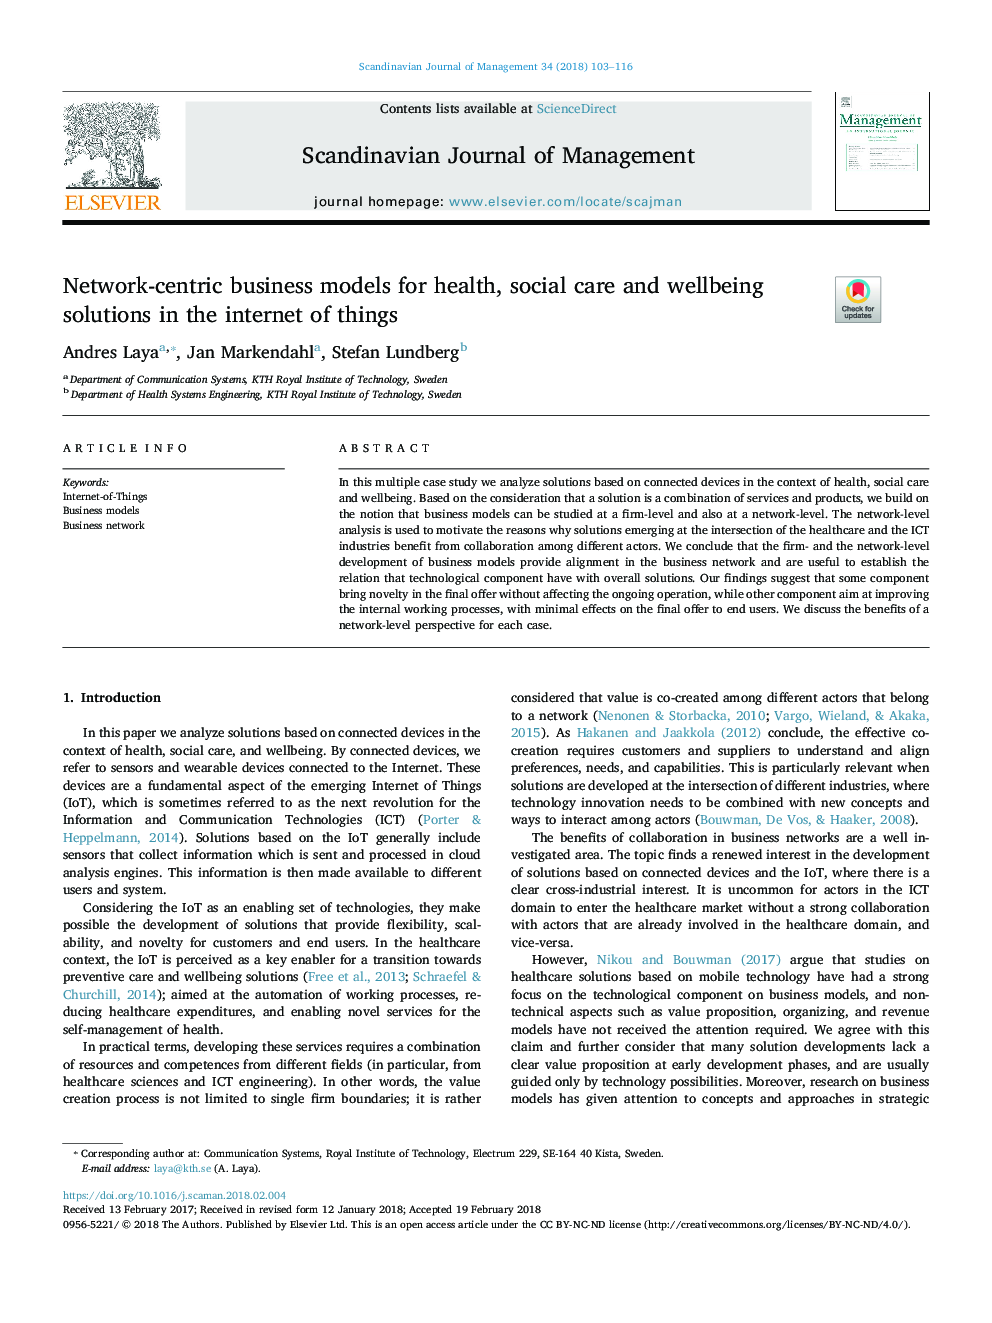 Network-centric business models for health, social care and wellbeing solutions in the internet of things